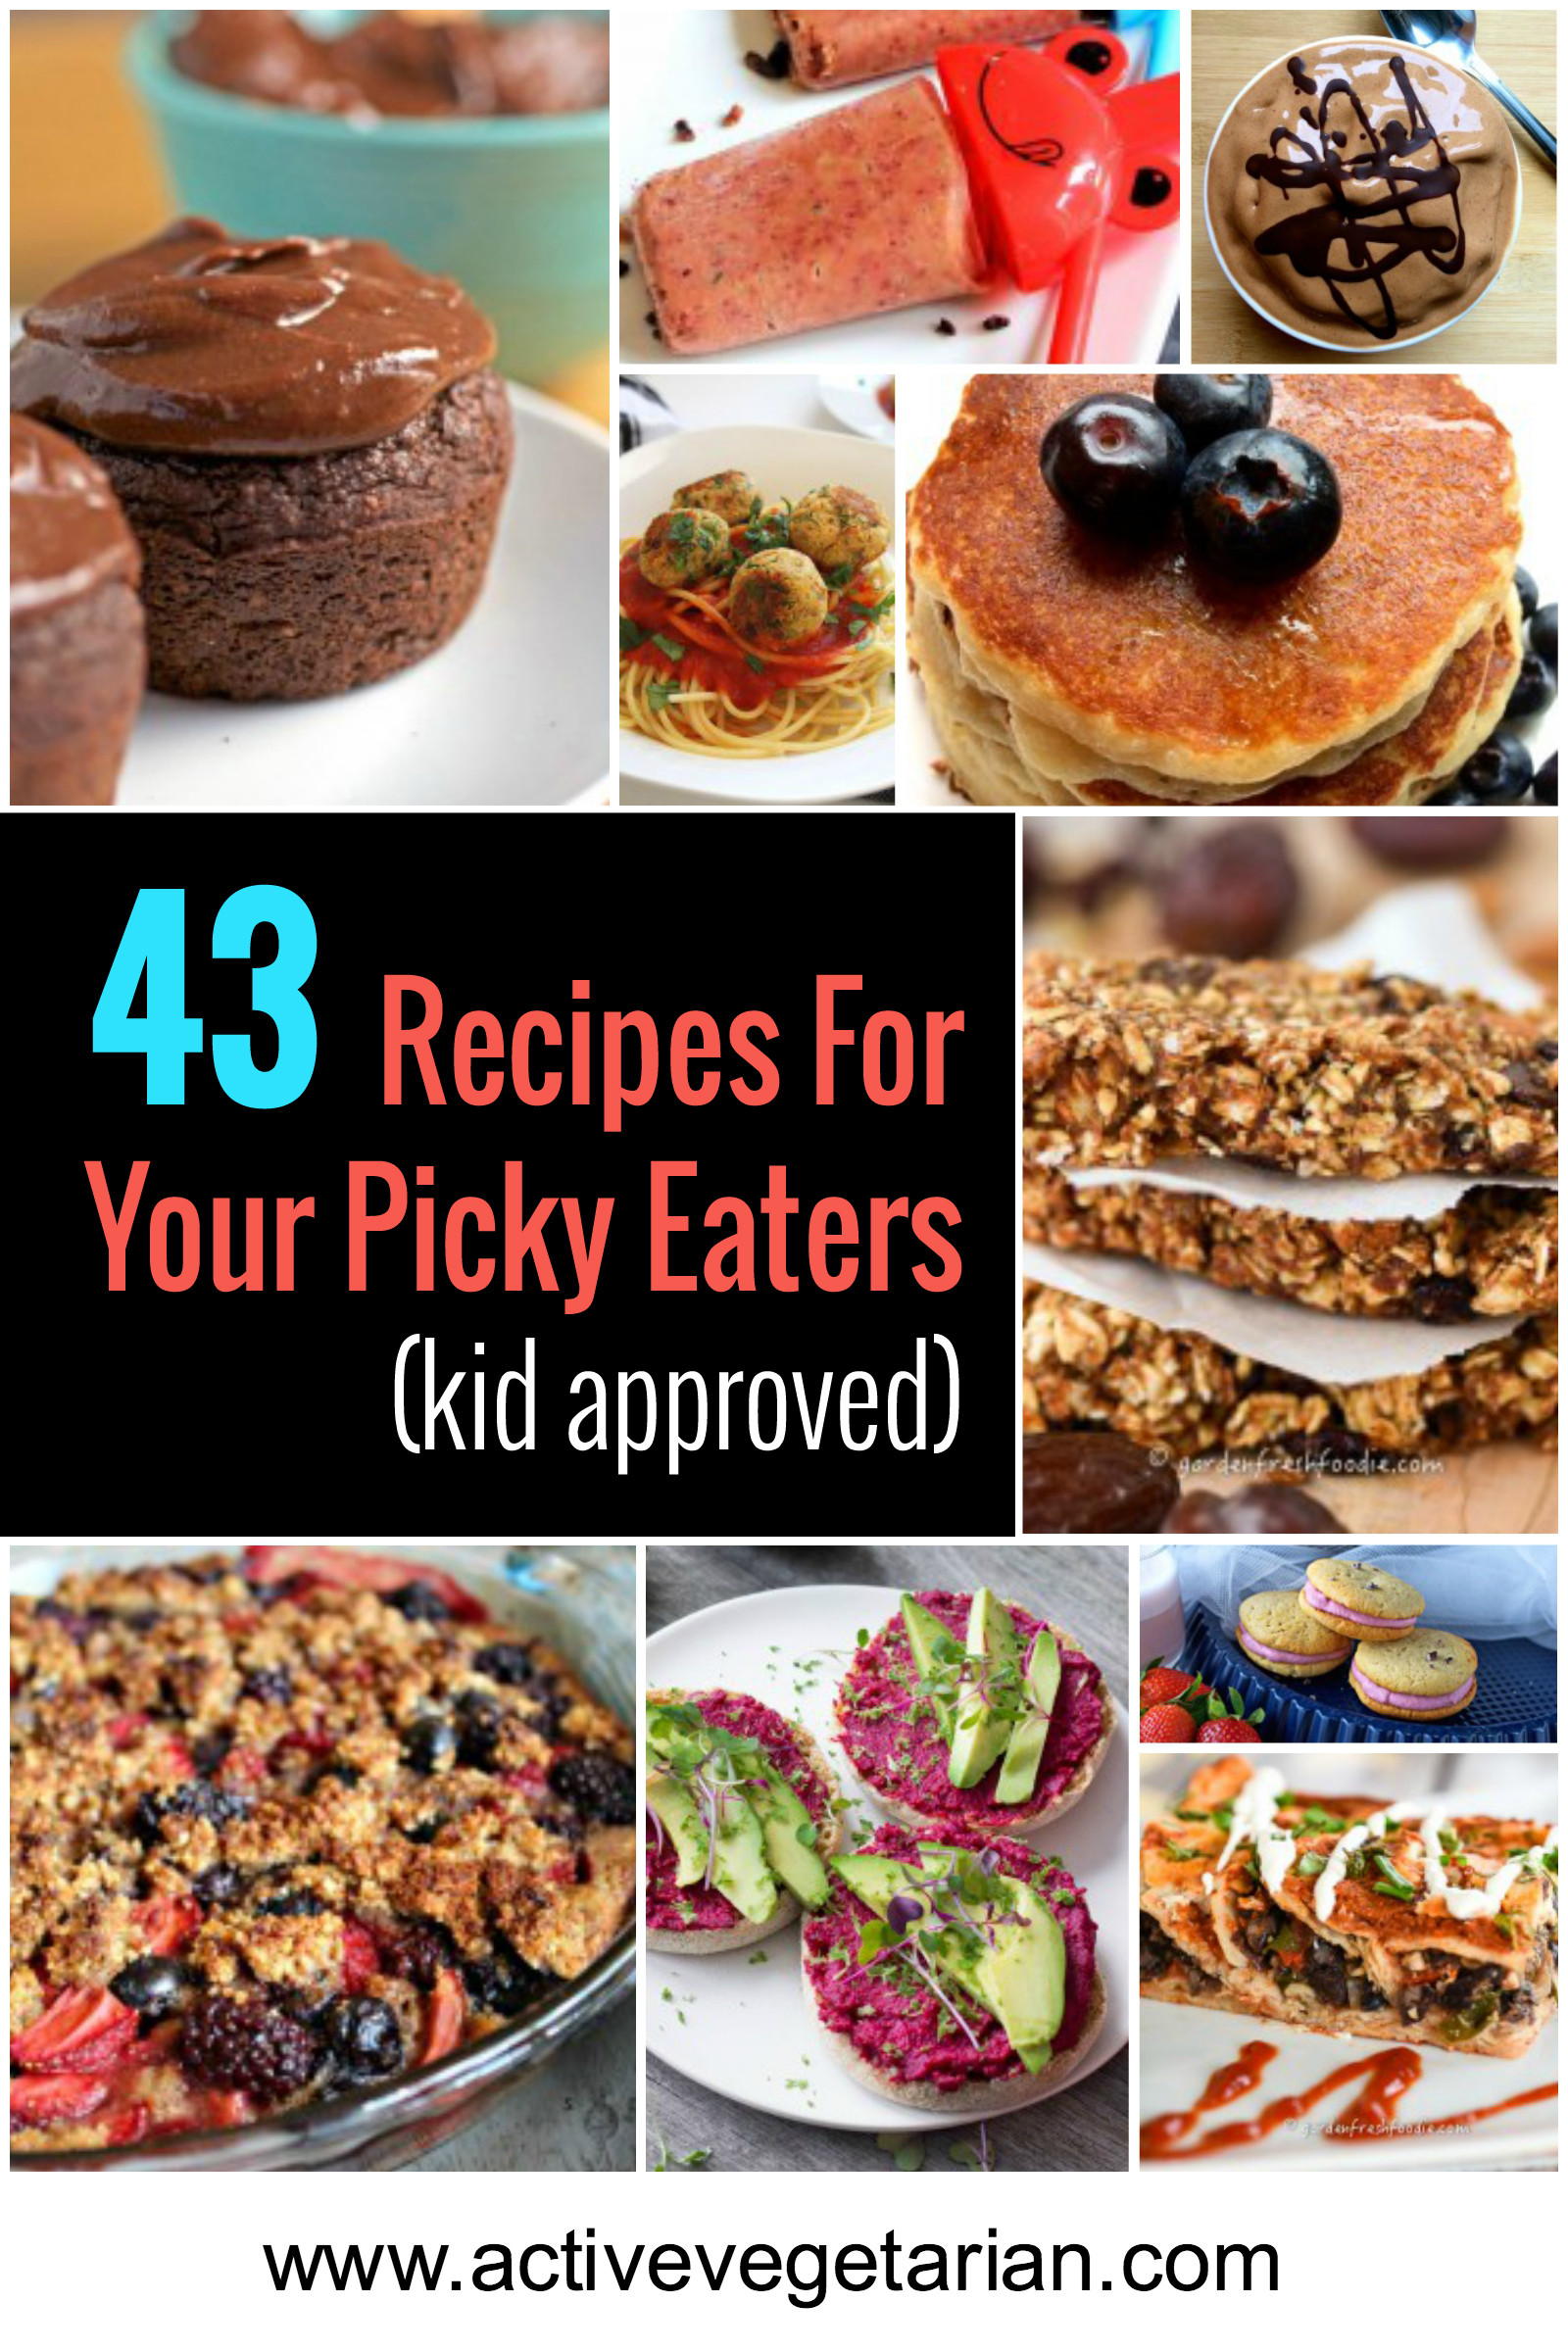 Vegetarian Recipes For Picky Eaters
 Recipe Roundup 43 Recipes For Your Picky Eater’s kid